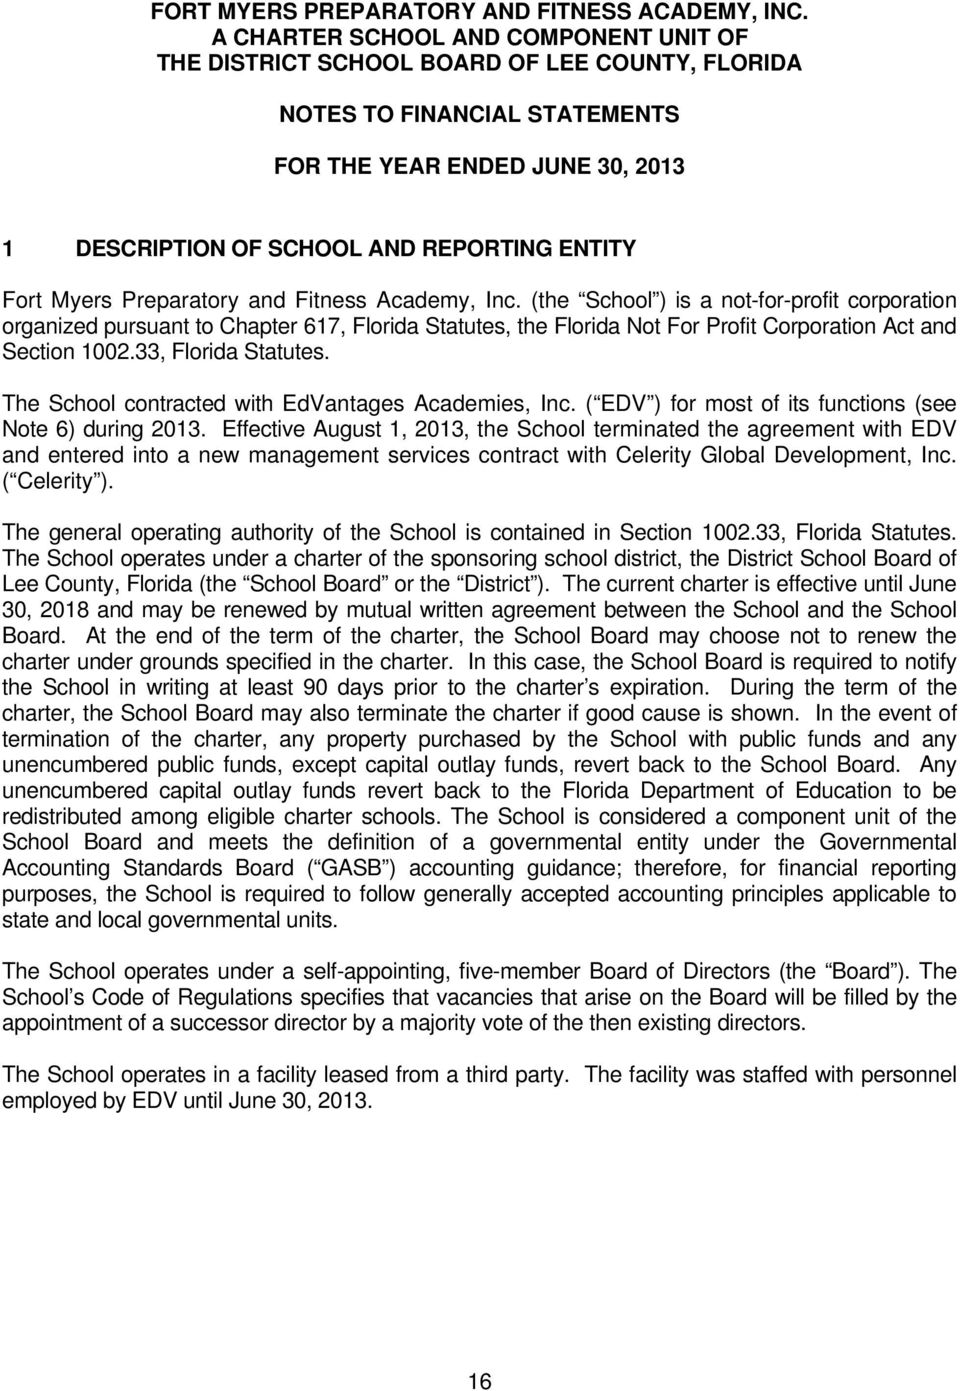 The School contracted with EdVantages Academies, Inc. ( EDV ) for most of its functions (see Note 6) during 2013.